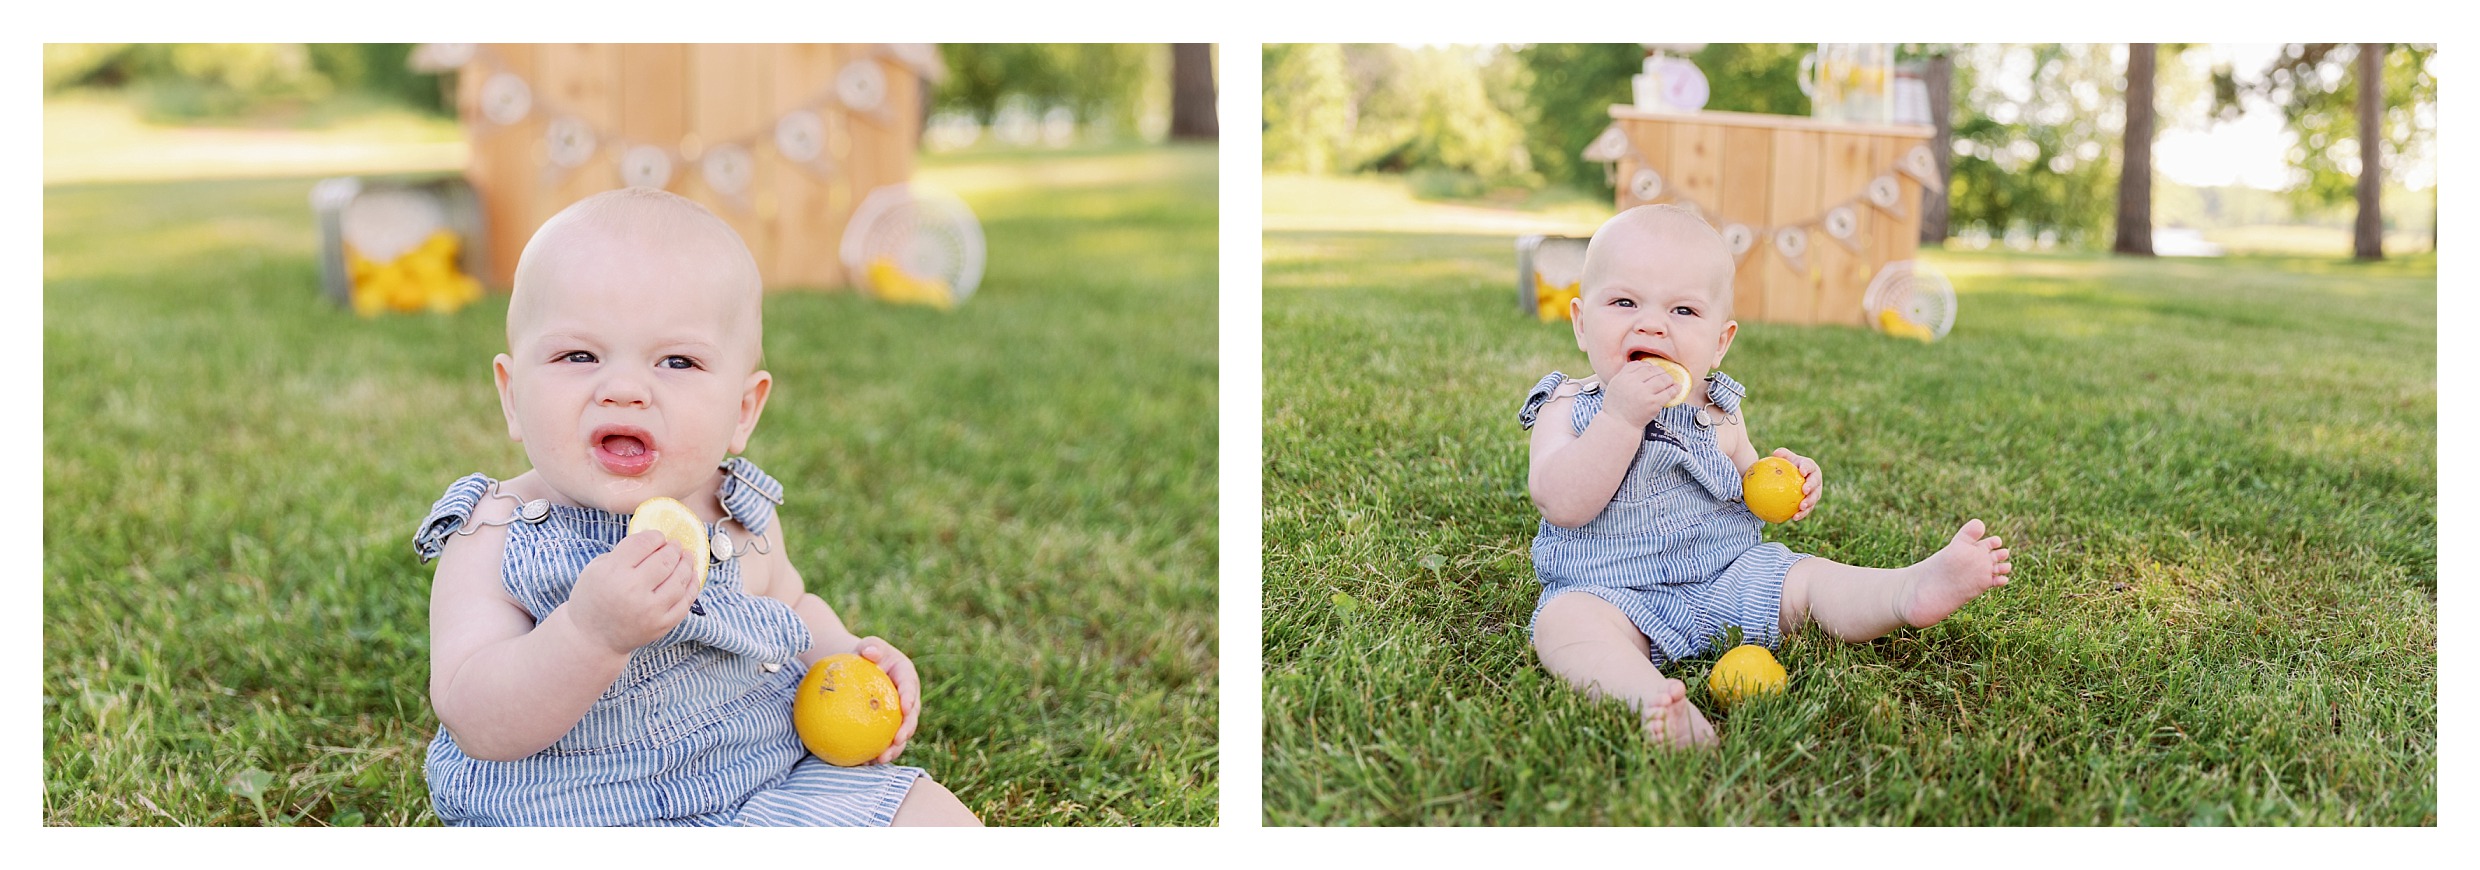 9 month old boy made sour faces at his lemonade stand mini session while he ate a lemon